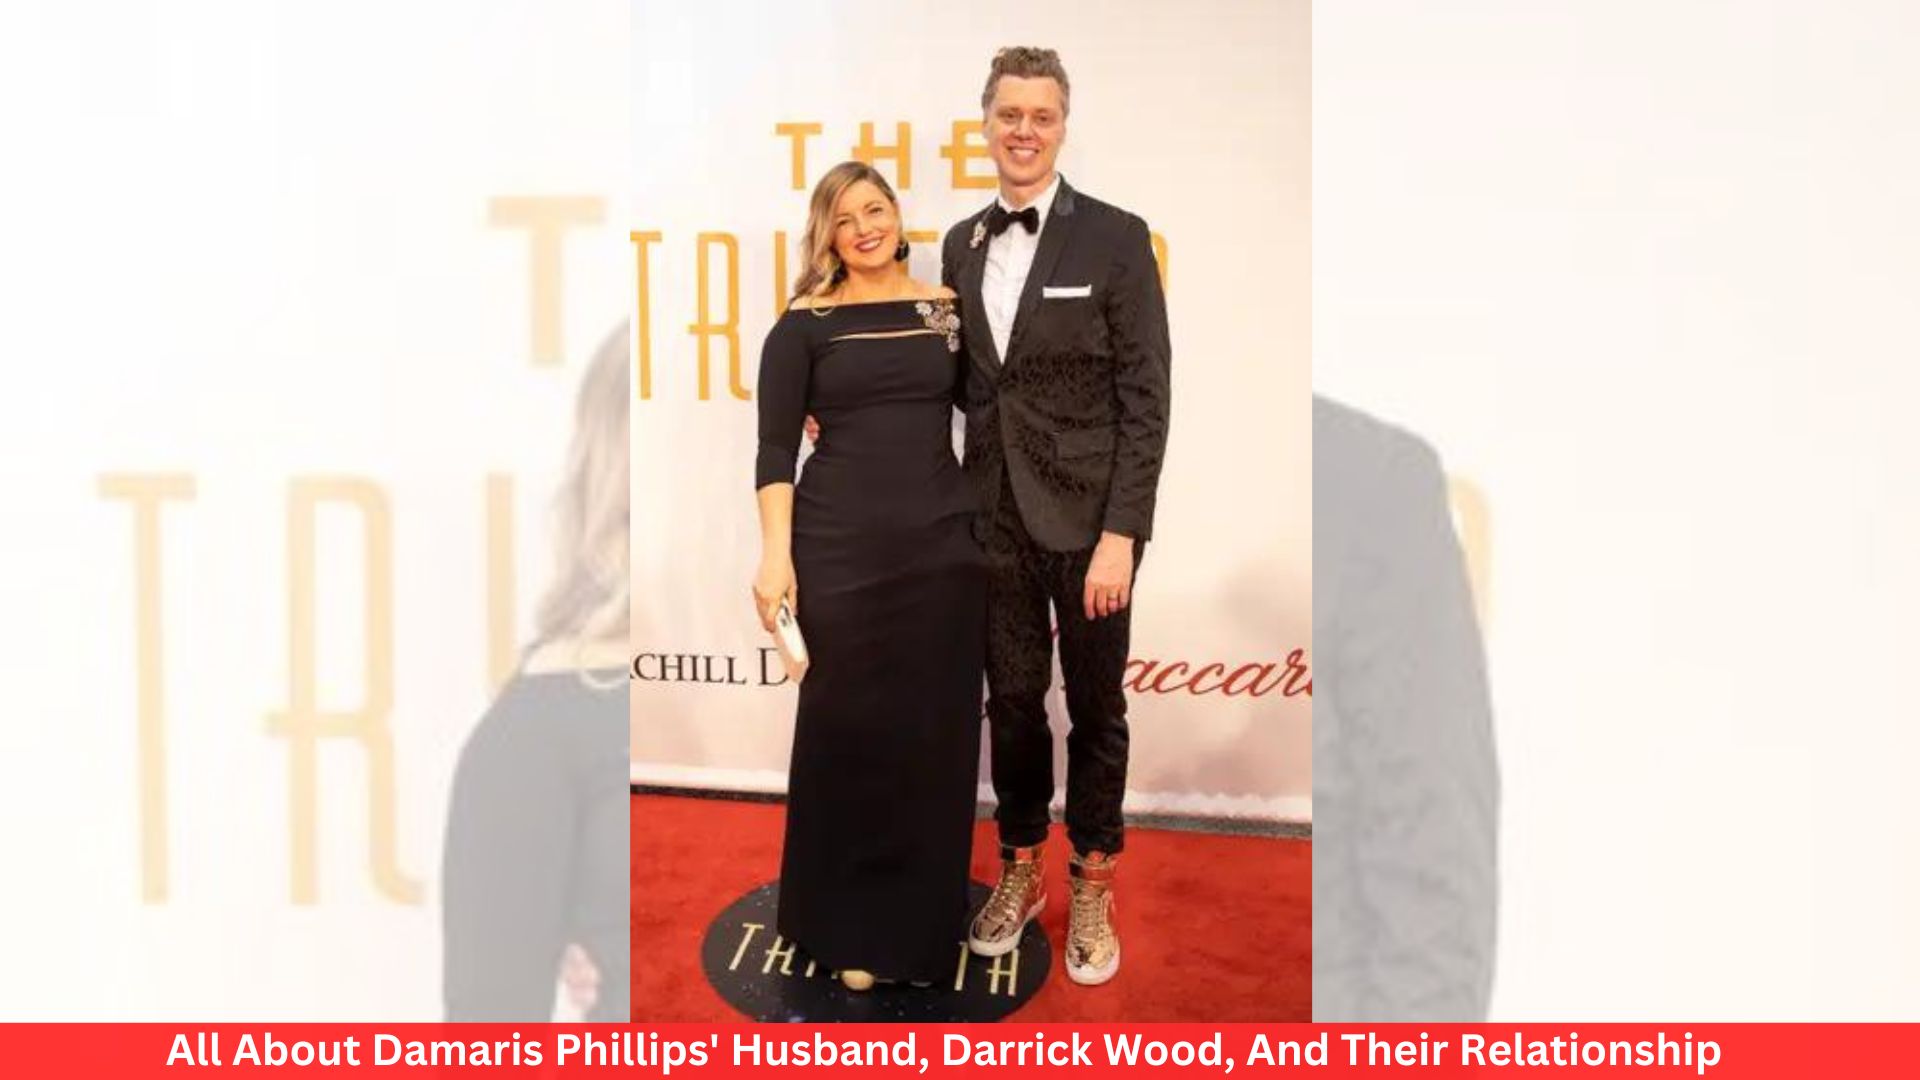 All About Damaris Phillips' Husband, Darrick Wood, And Their Relationship